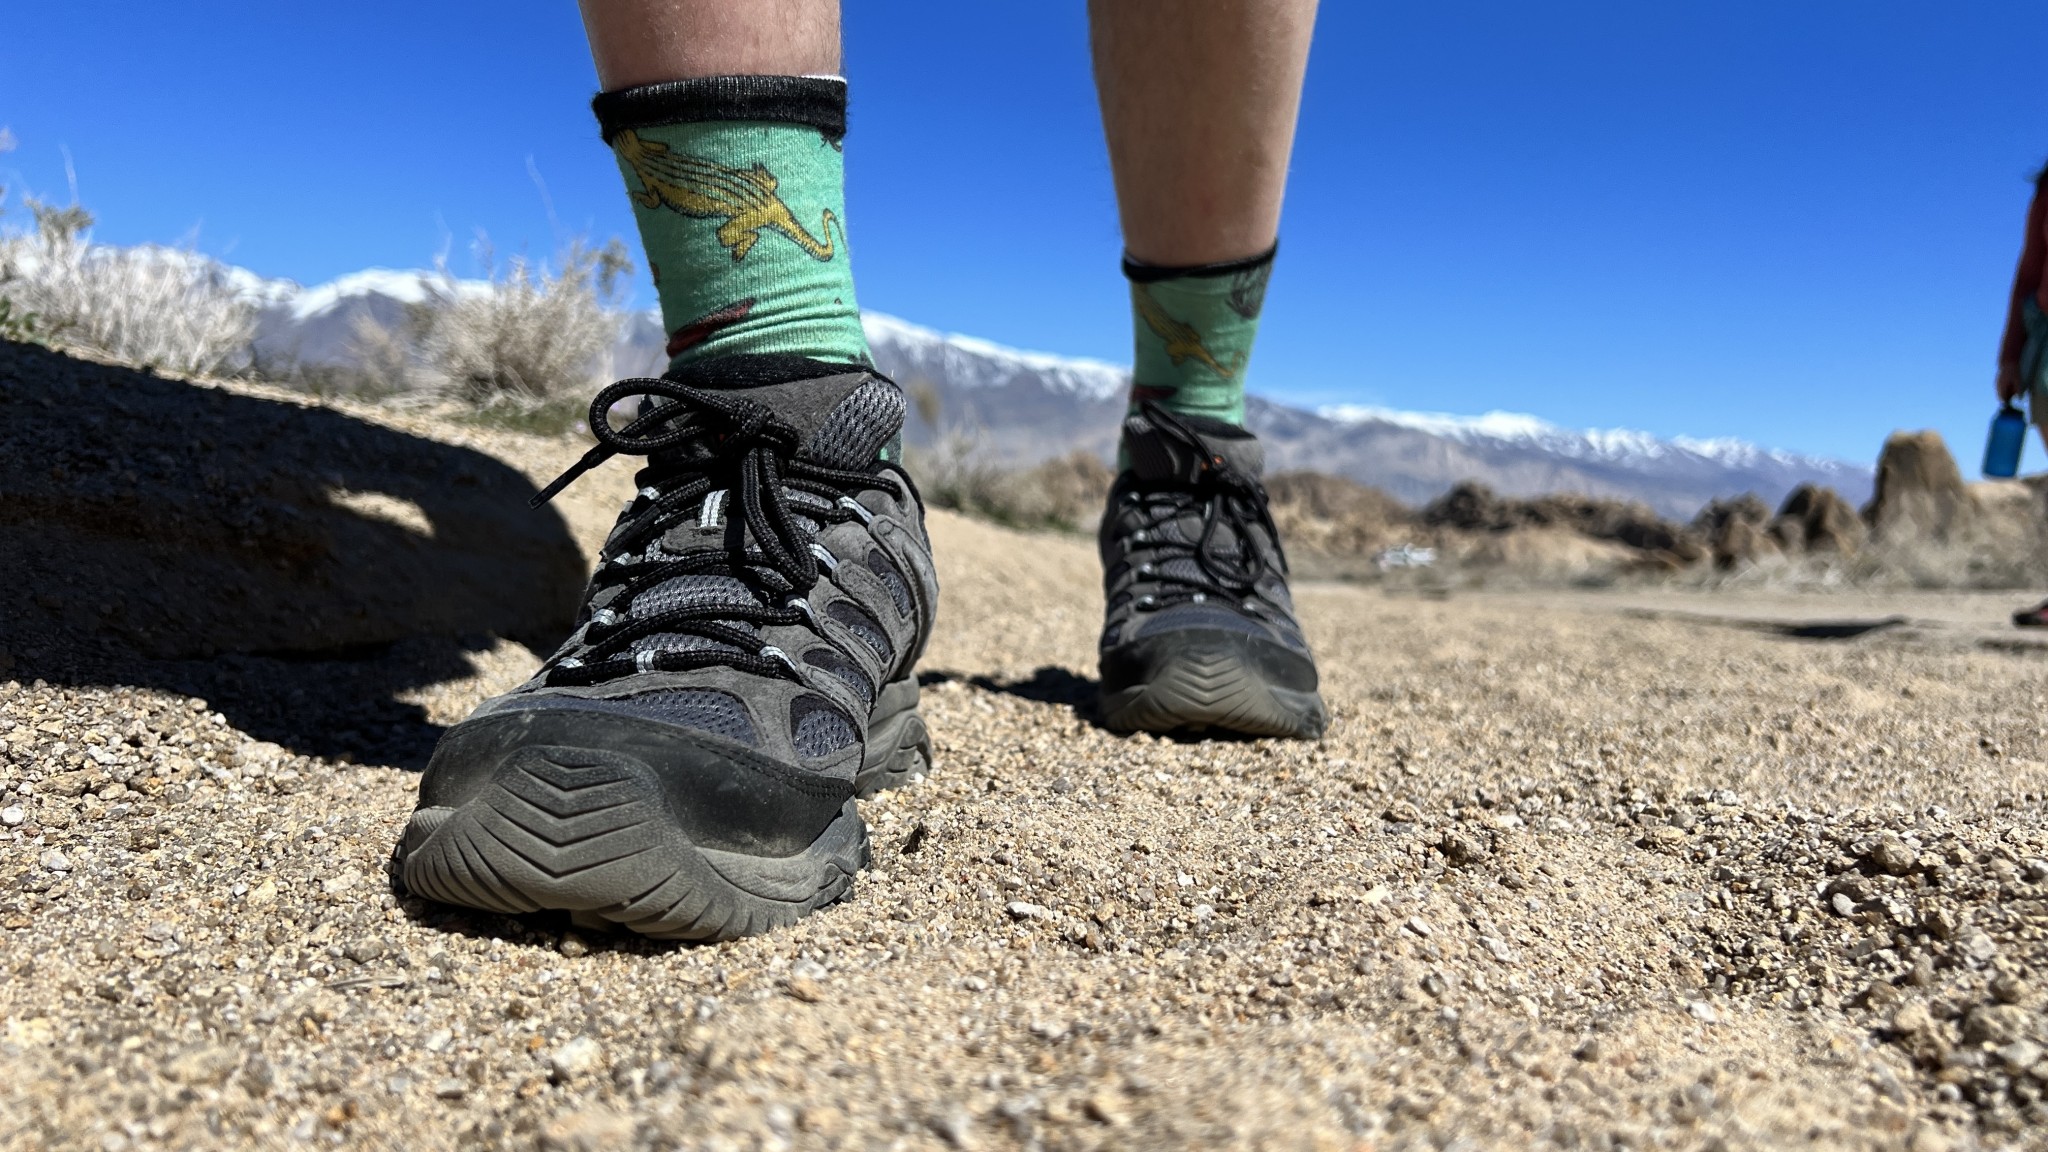 Merrell Moab 3 Waterproof Review | Tested & Rated